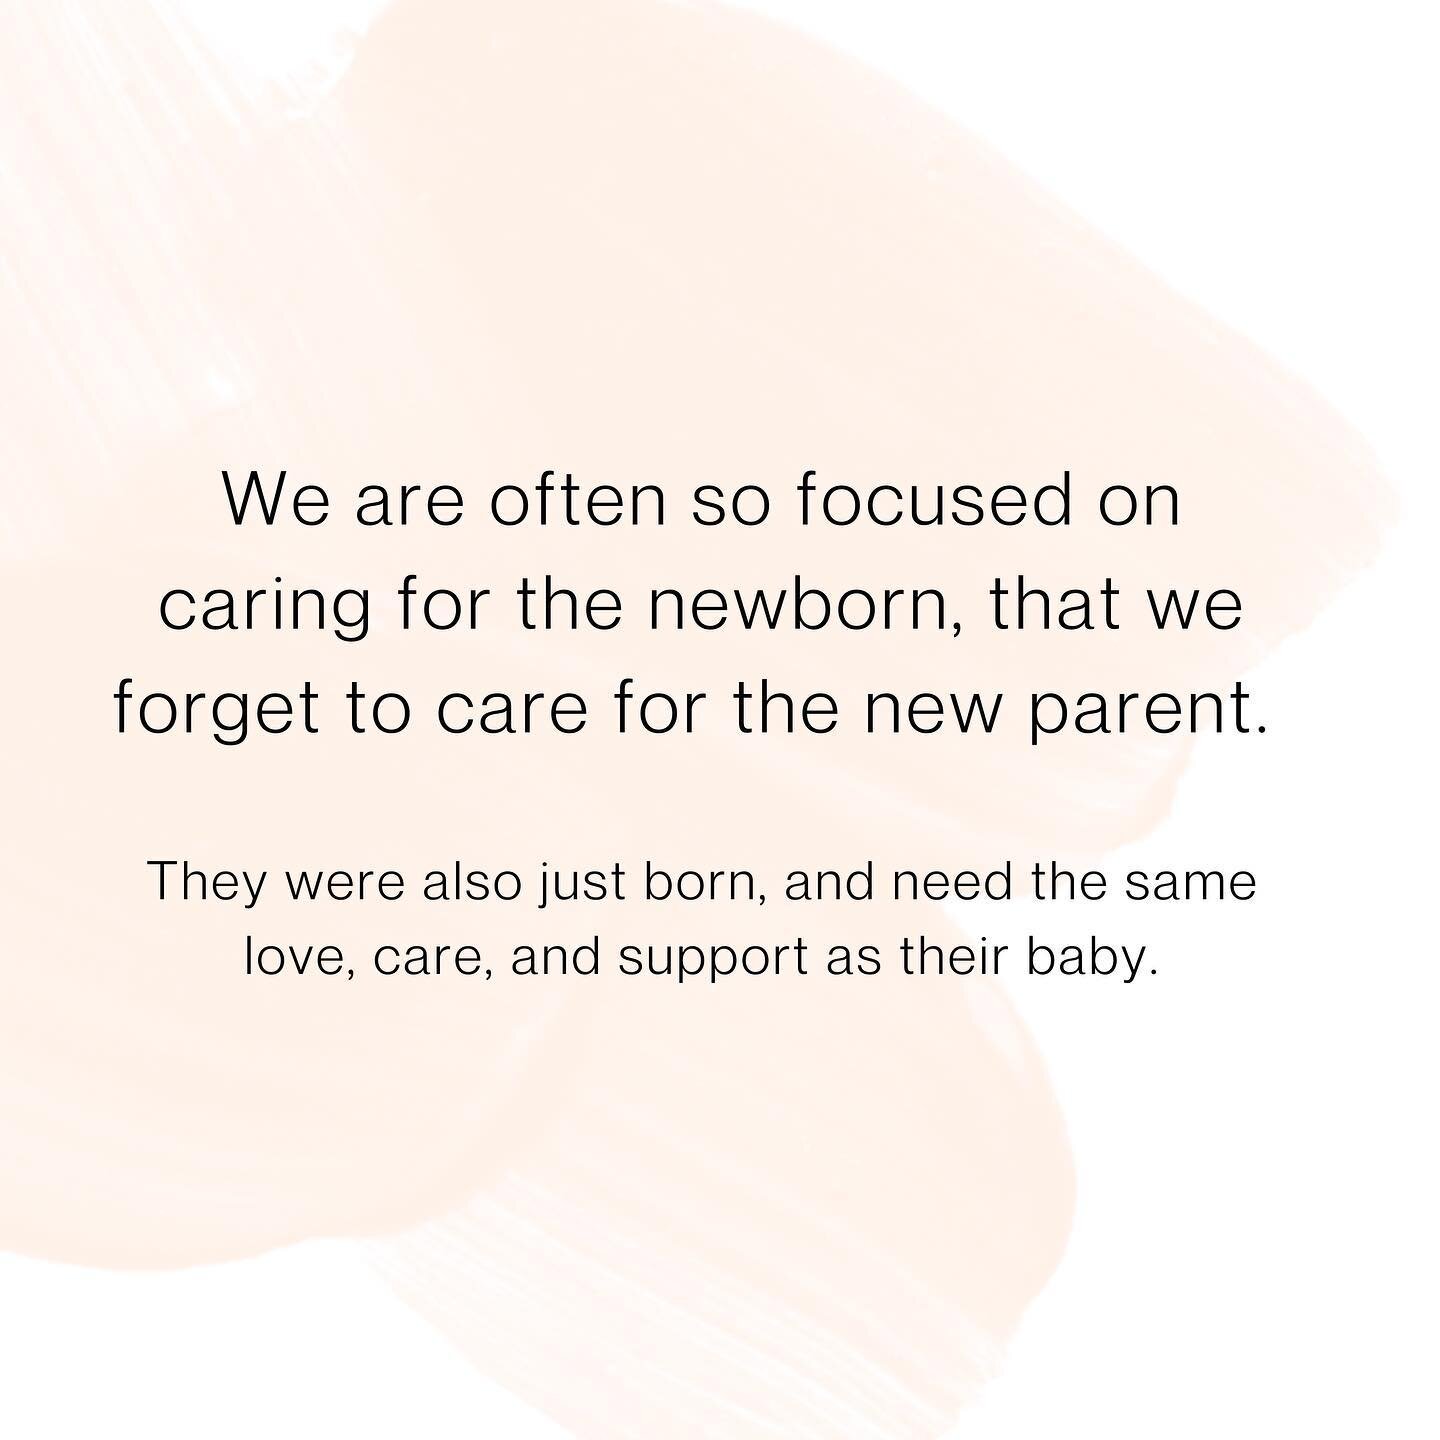 Recovering from birth, learning to care for herself while also caring for her newborn, coping with fatigue and mood changes, managing chronic health conditions developed during pregnancy - the list goes on. 

There is so much that a new parent deserv